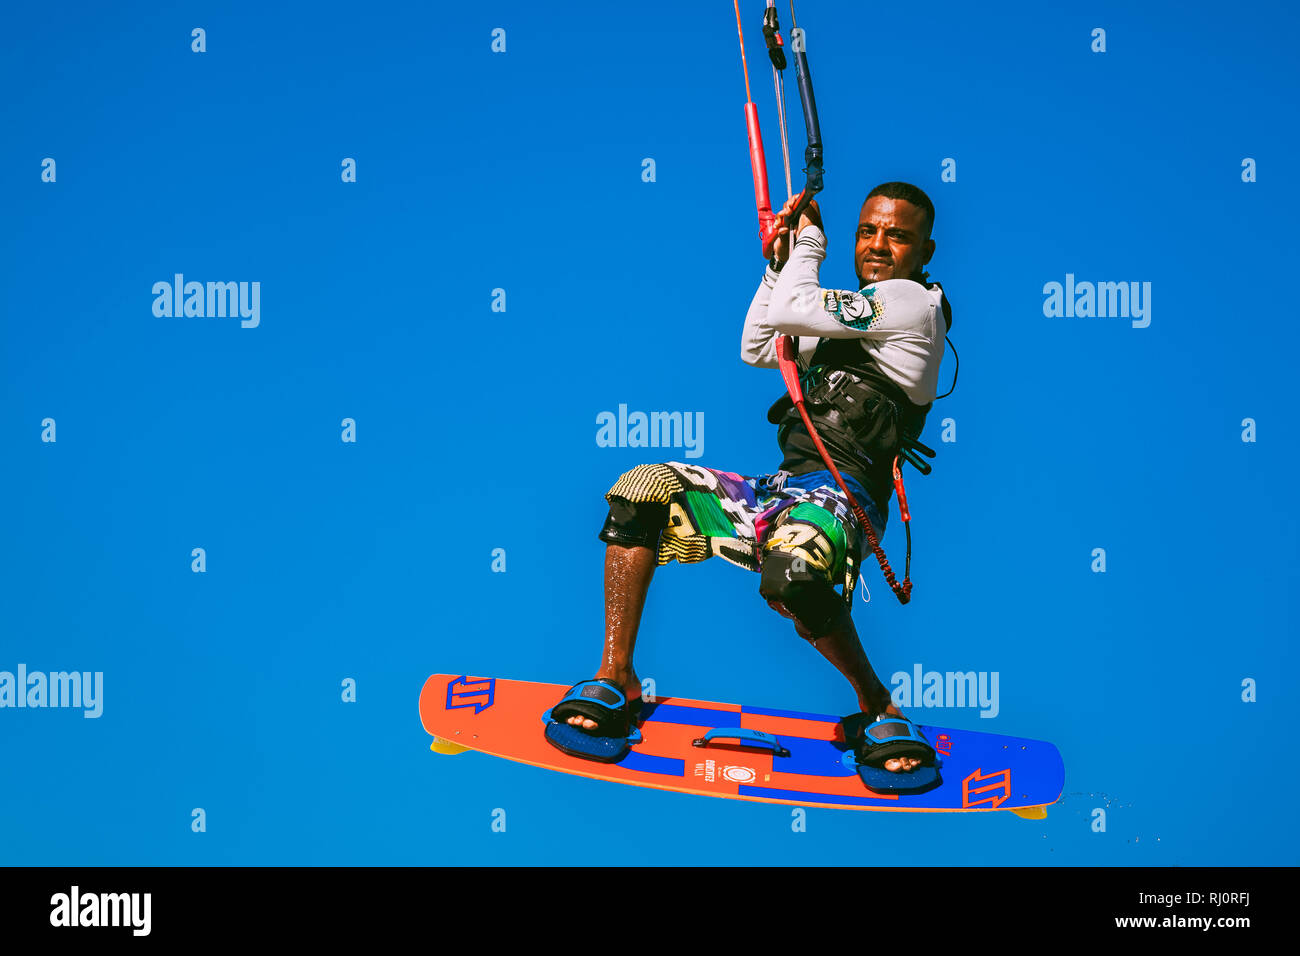 Egypt, Hurghada - 30 November, 2017: Close-up sportsman kitesurfer soaring in the blue sky. The surfer fully equipped with the board and kite elements in the air. The extreme professional flight. Stock Photo